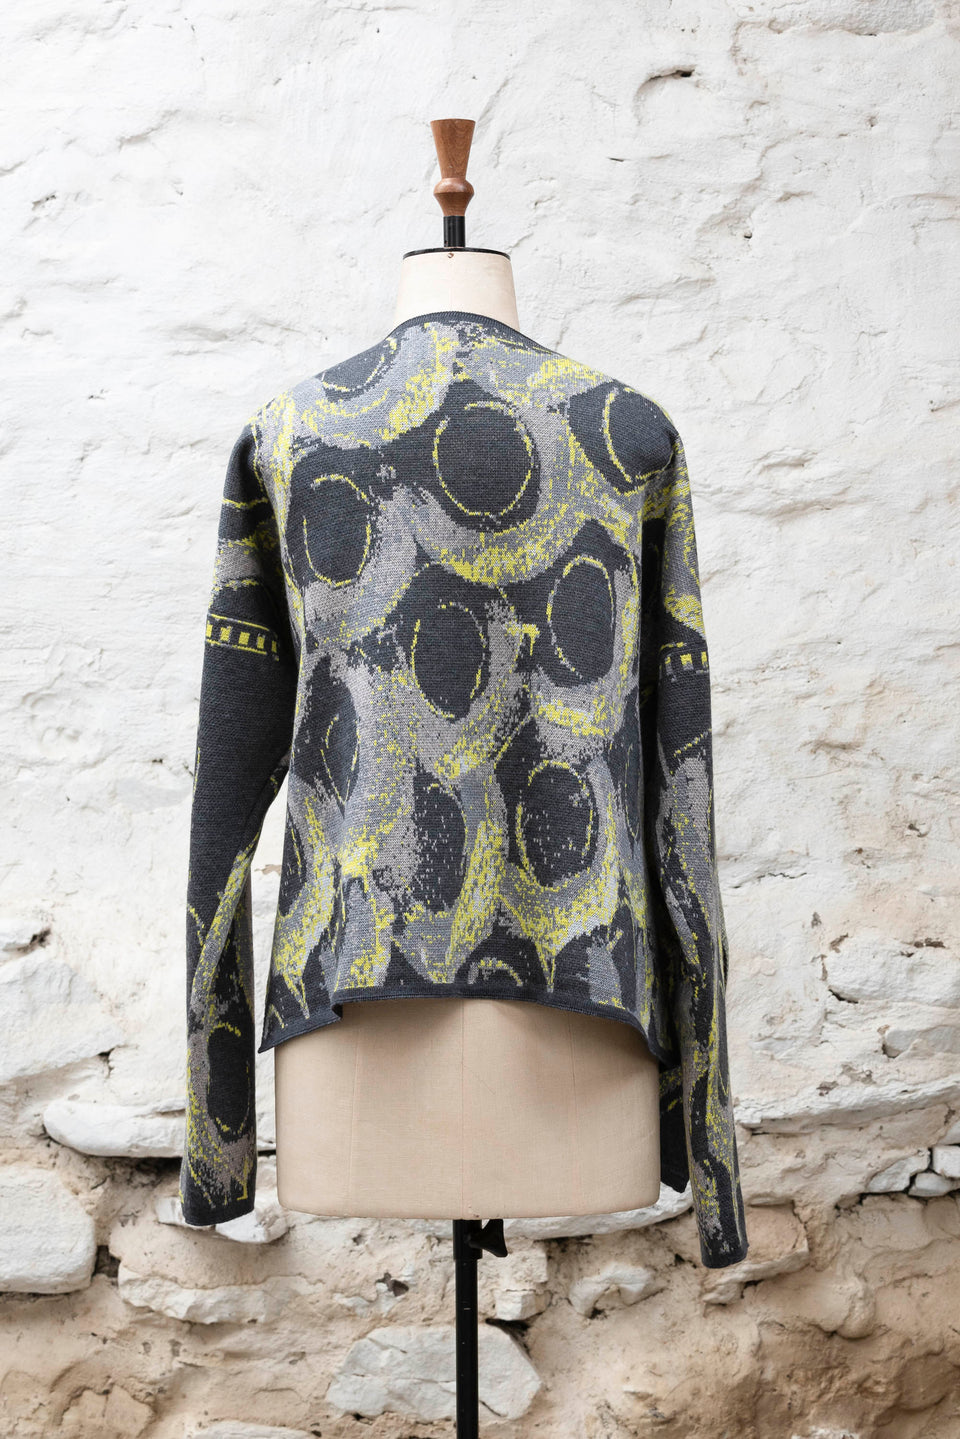 Knitted jacket inspired by the Shetland coastal village of Hoswick. Abstract curvilinear motif in greys and fluoro yellow. Asymmetric design with lapels that fold back. Shown from the back, on a vintage mannequin, against a white washed rustic stone wall